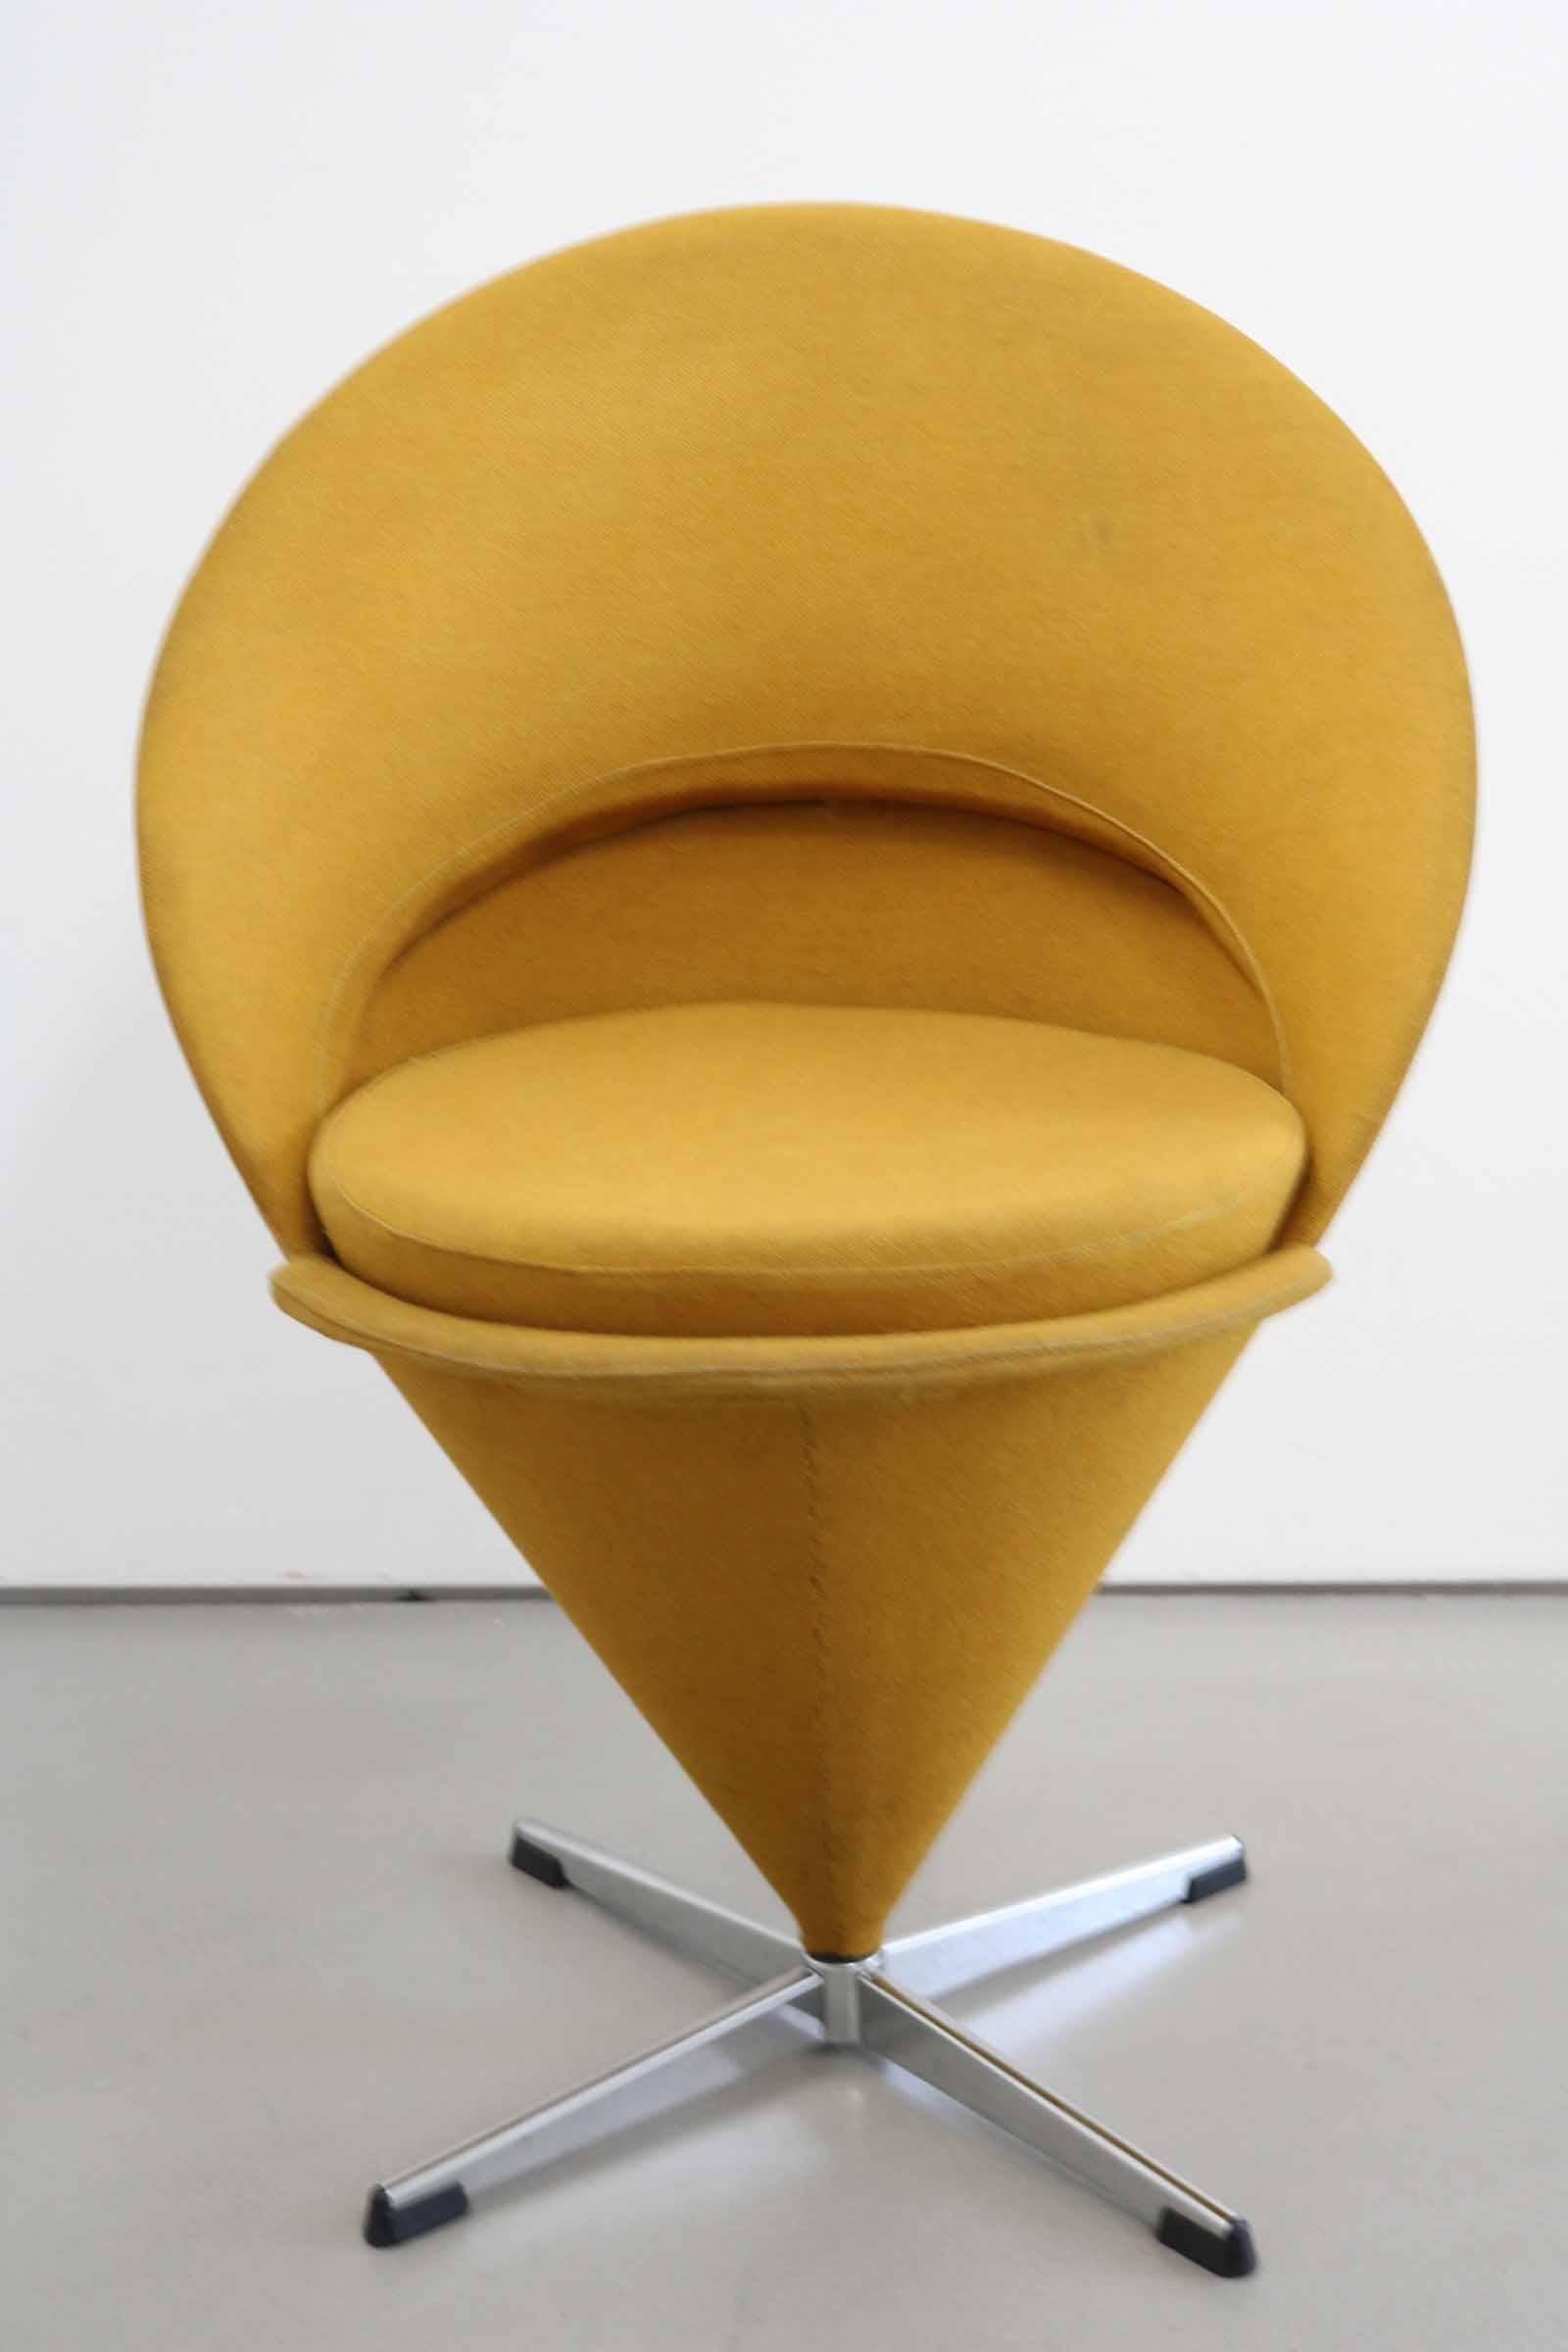 Cone chair by Verner Panton for Plus Linje in RAR 60s original mustard colored fabric. The fabric is in its original condition with only minor signs of use including very small, light stains.